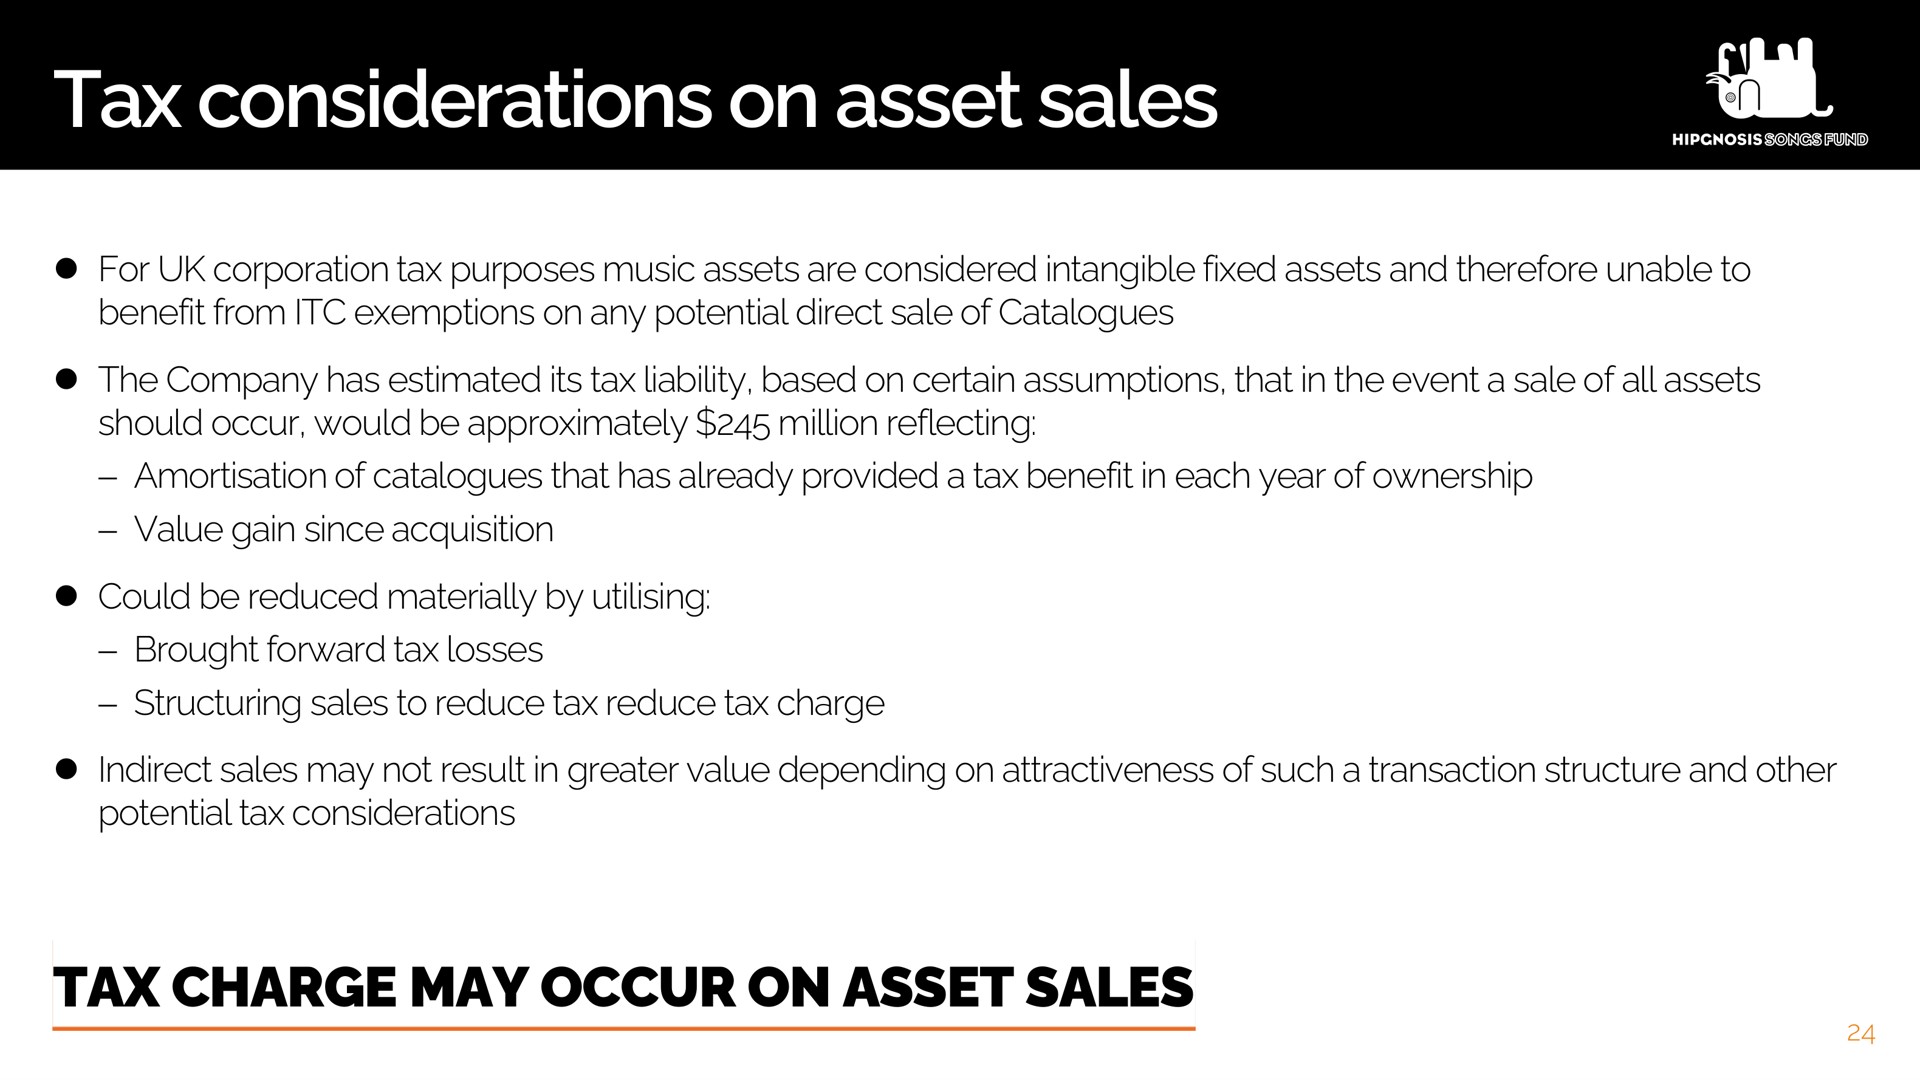 tax considerations on asset sales i charge may occur | Hipgnosis Songs Fund